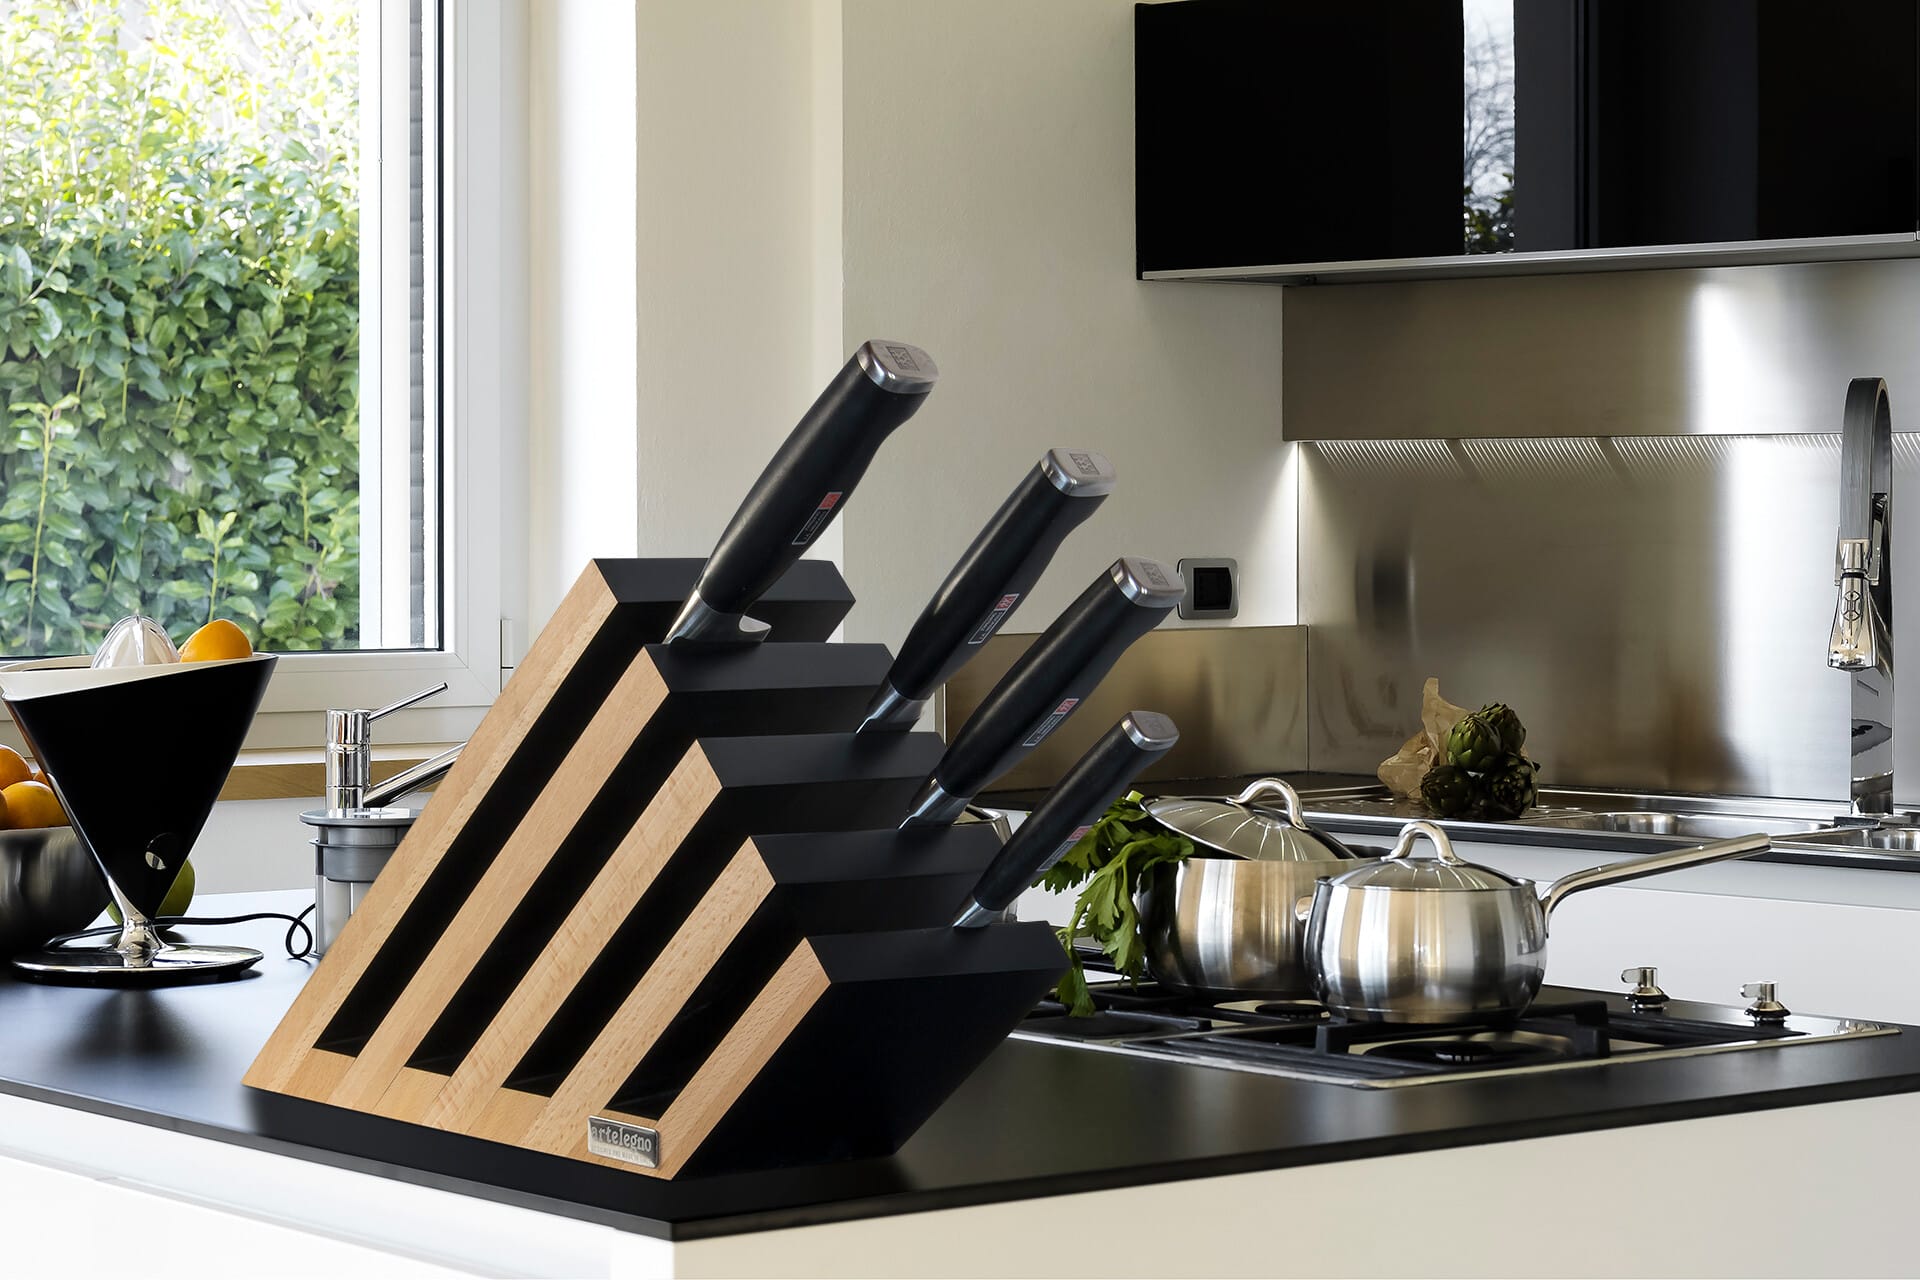 Small Eco-friendly Way to Store Utensils-Natural Finish Luxurious Italian Collection by Master Craftsmen Artelegno Solid Beech Wood Cooking Tools Holder 